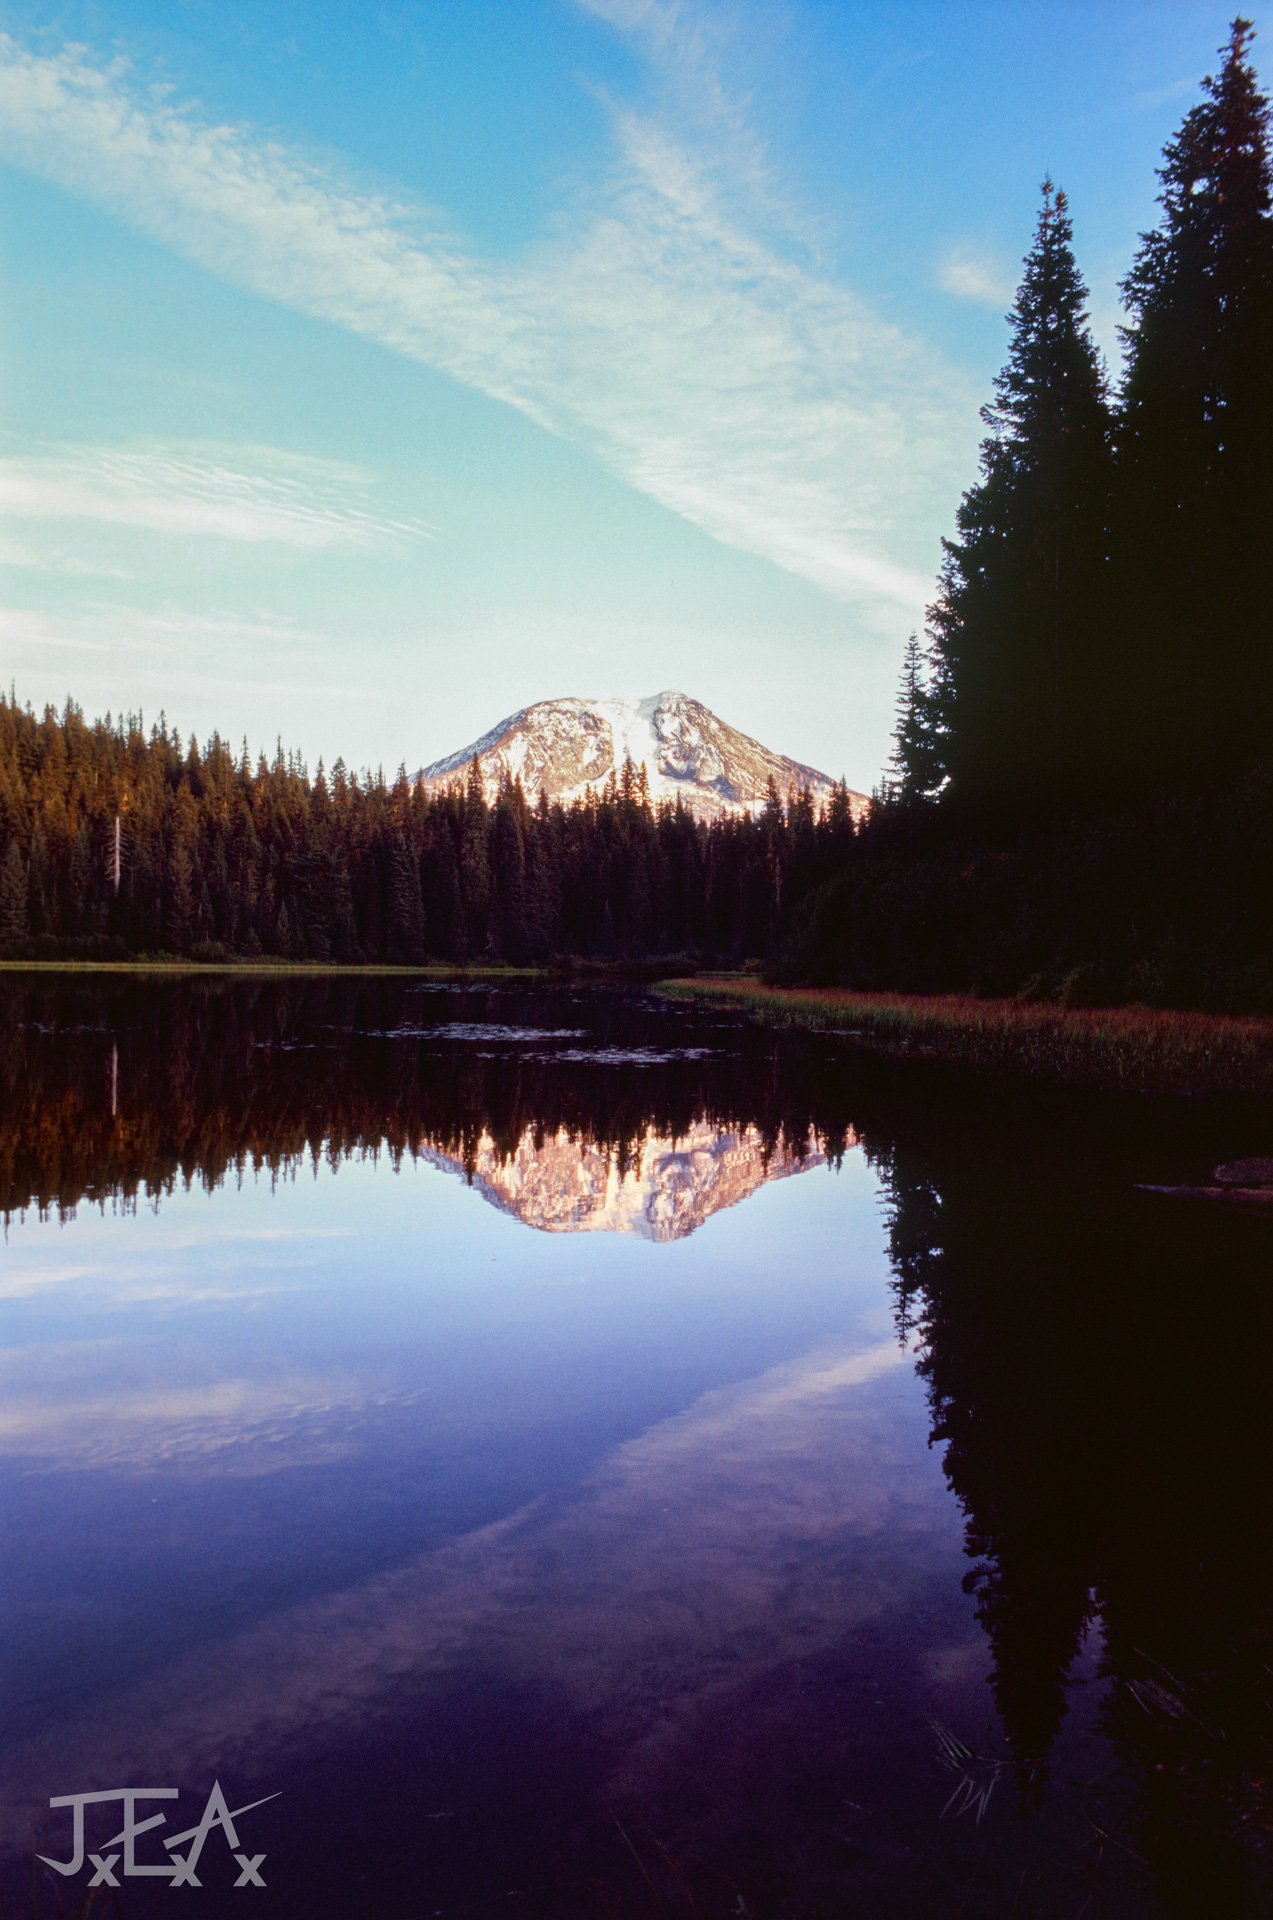 Mt. Adams seen from the shore of Olallie Lake in the Gifford Pinchot National Forest.